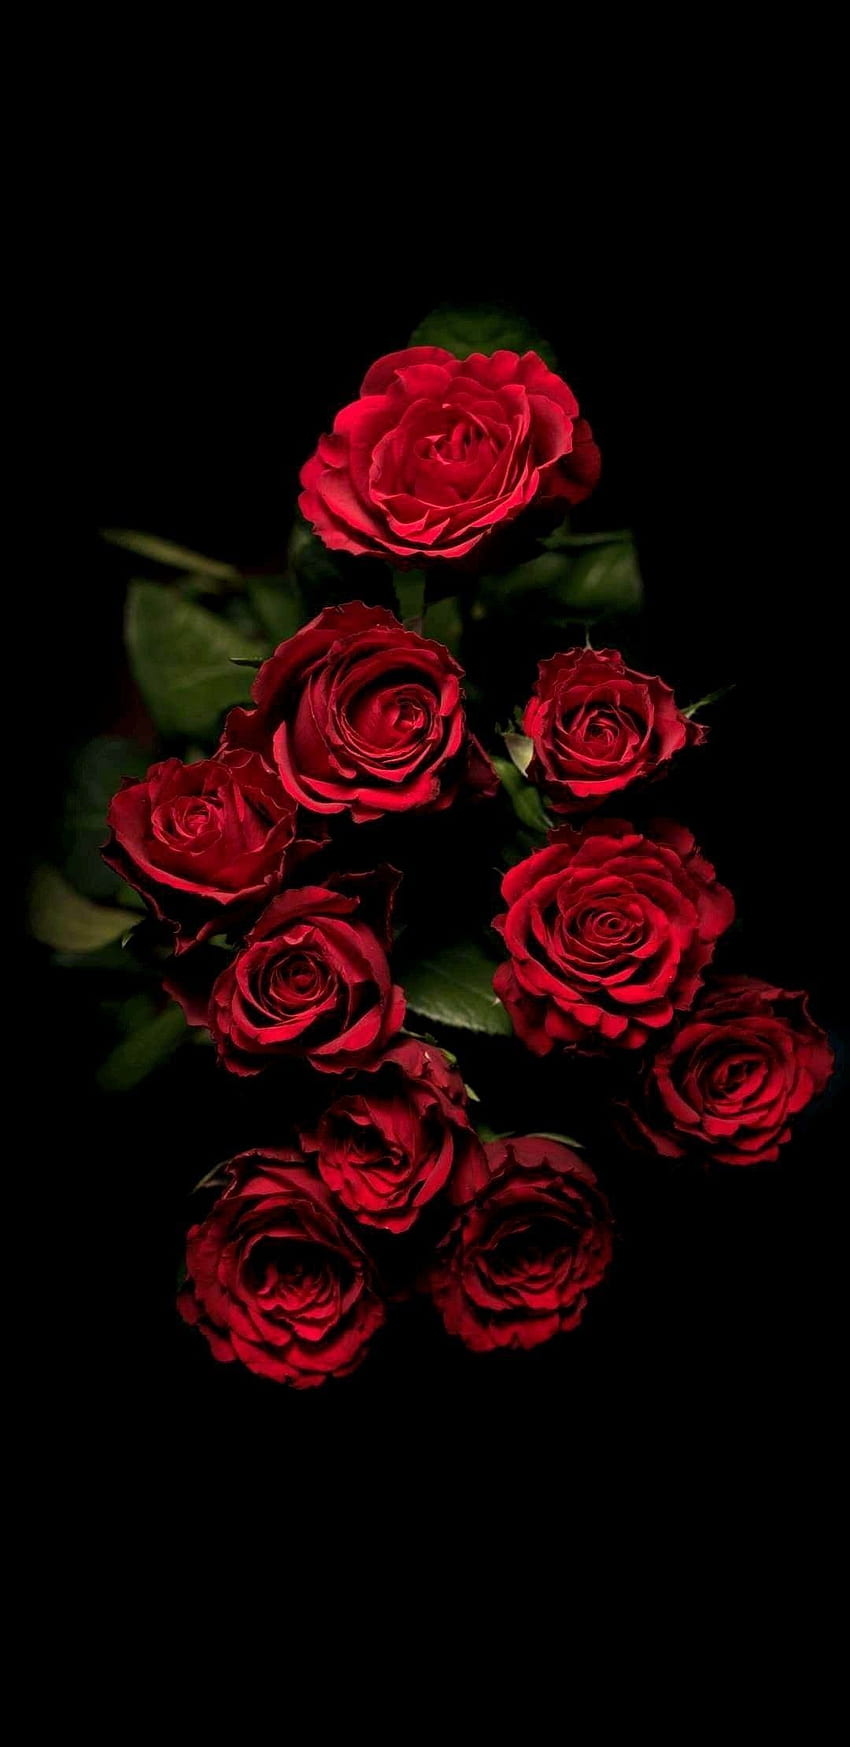 25 Beautiful Roses Wallpaper Backgrounds For iPhone  Red flower wallpaper  Red roses wallpaper Red wallpaper